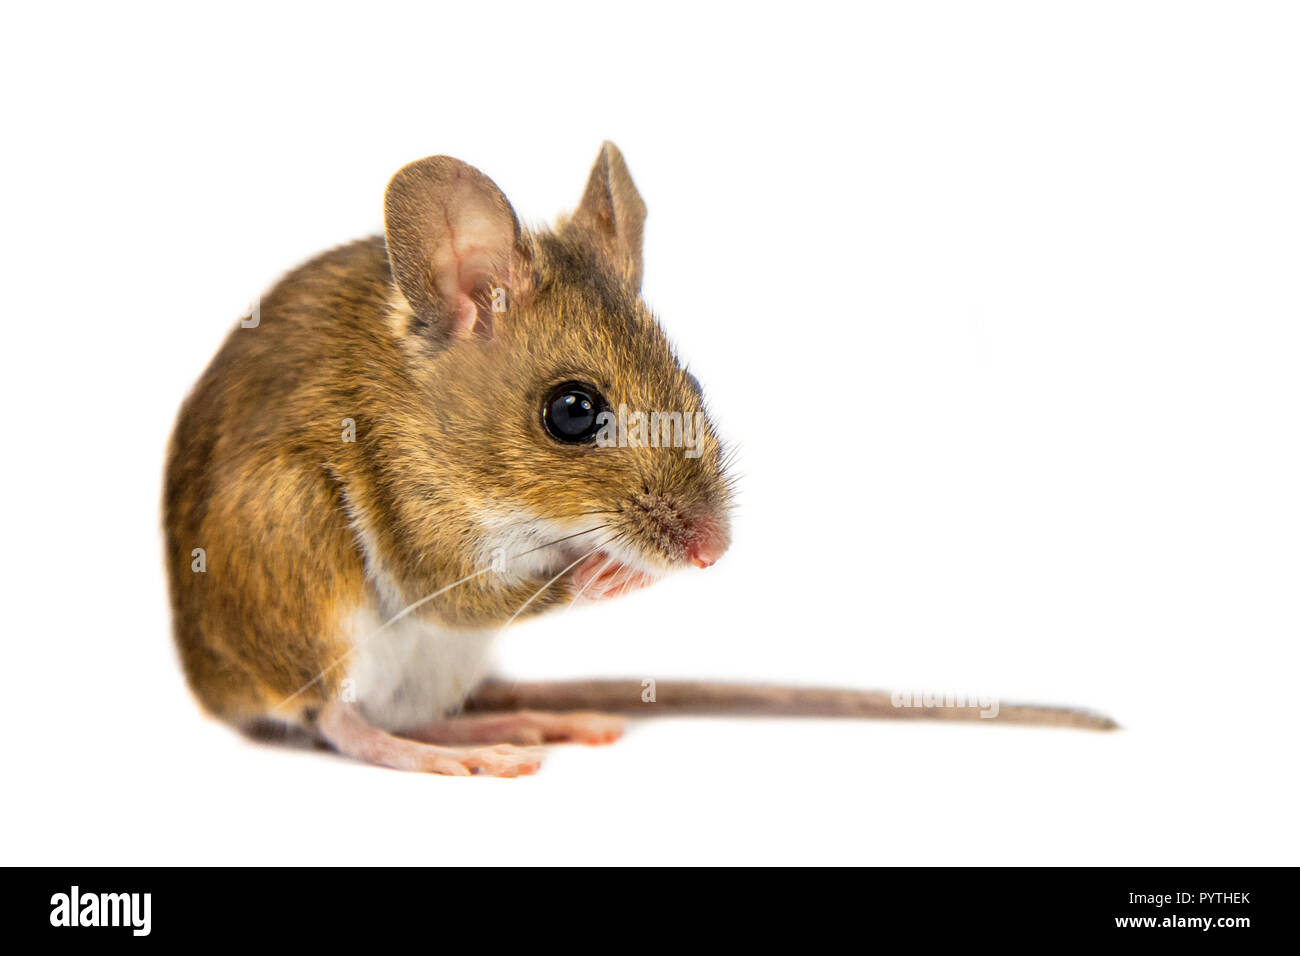 Pondering Wood mouse (Apodemus sylvaticus) meditating patiently on hind legs and looking in the camera on white background Stock Photo